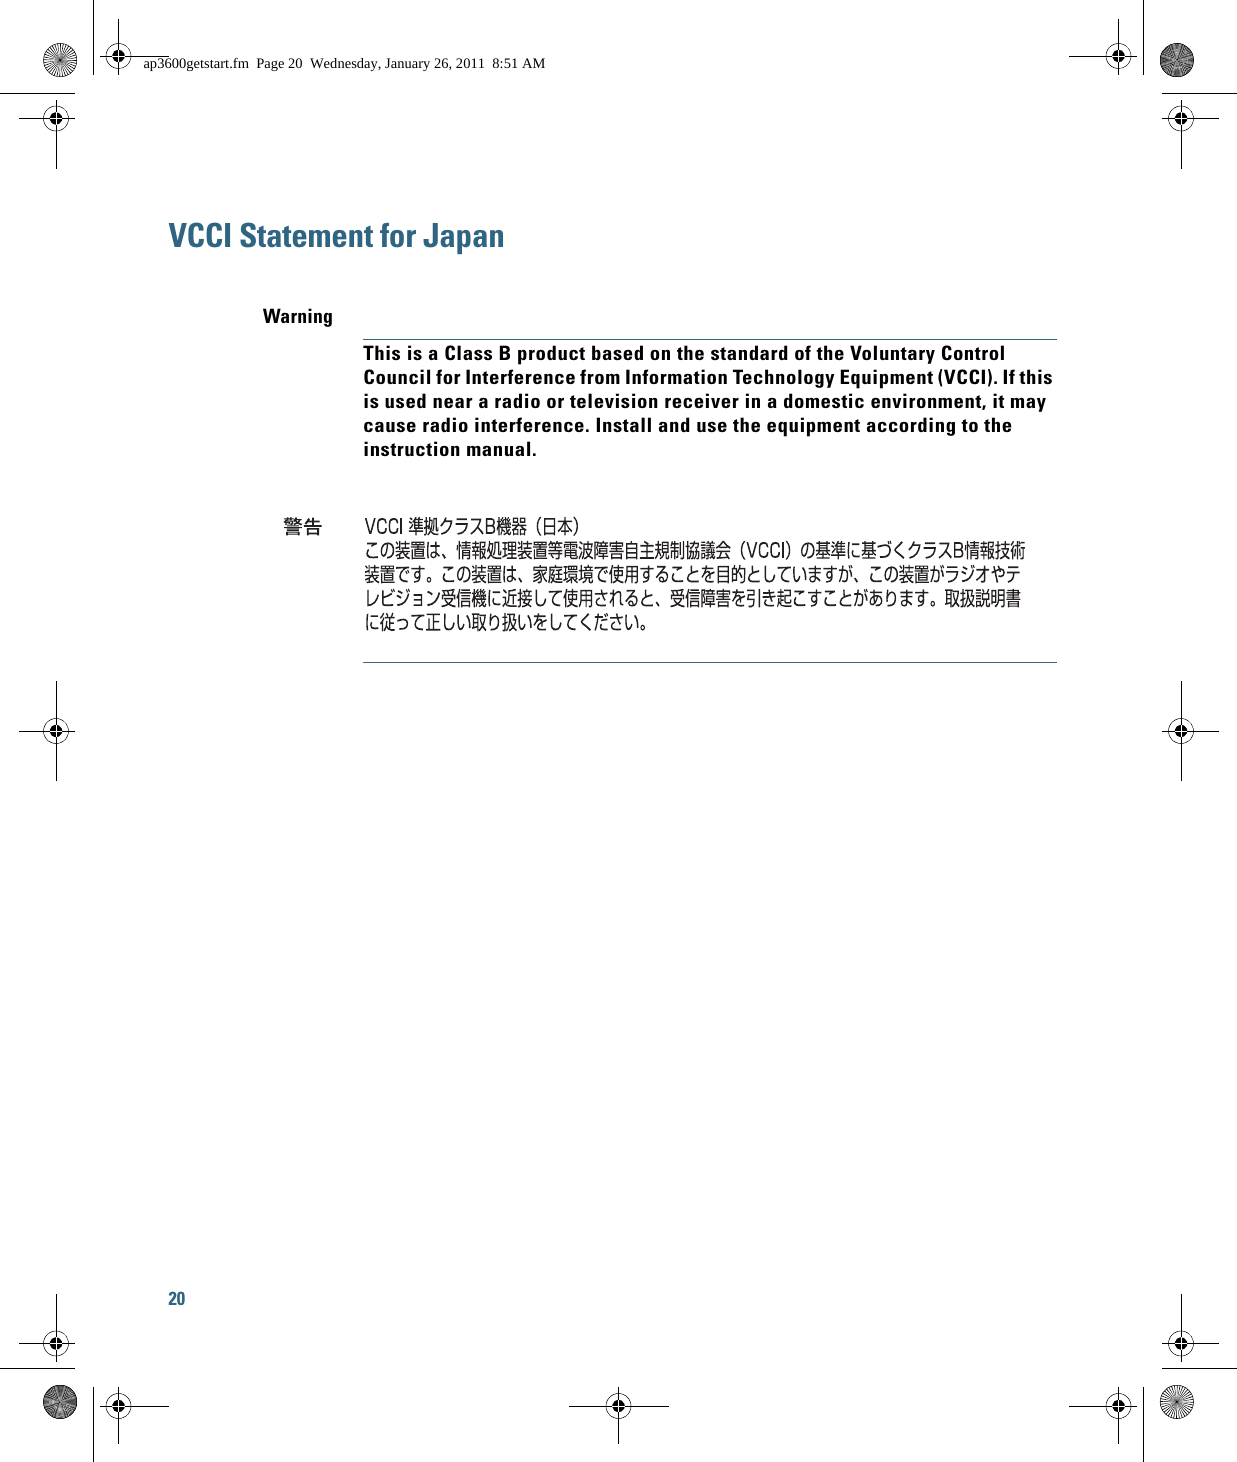 20 VCCI Statement for JapanWarningThis is a Class B product based on the standard of the Voluntary Control Council for Interference from Information Technology Equipment (VCCI). If this is used near a radio or television receiver in a domestic environment, it may cause radio interference. Install and use the equipment according to the instruction manual.ap3600getstart.fm  Page 20  Wednesday, January 26, 2011  8:51 AM